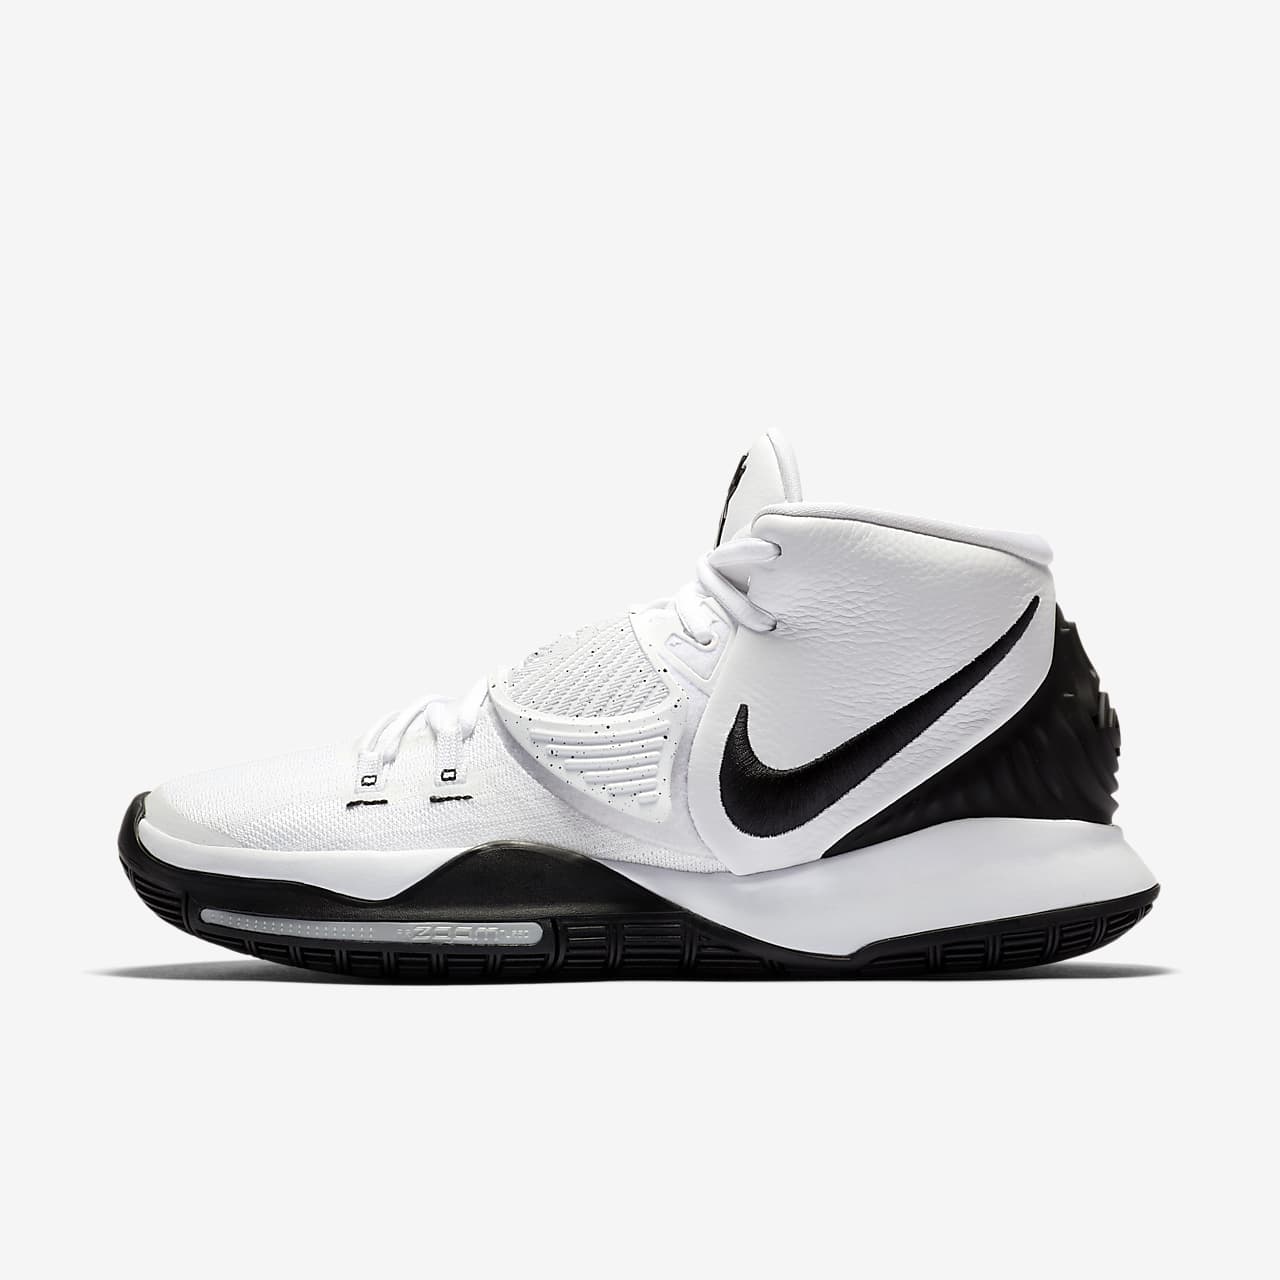 nike 6 number shoes